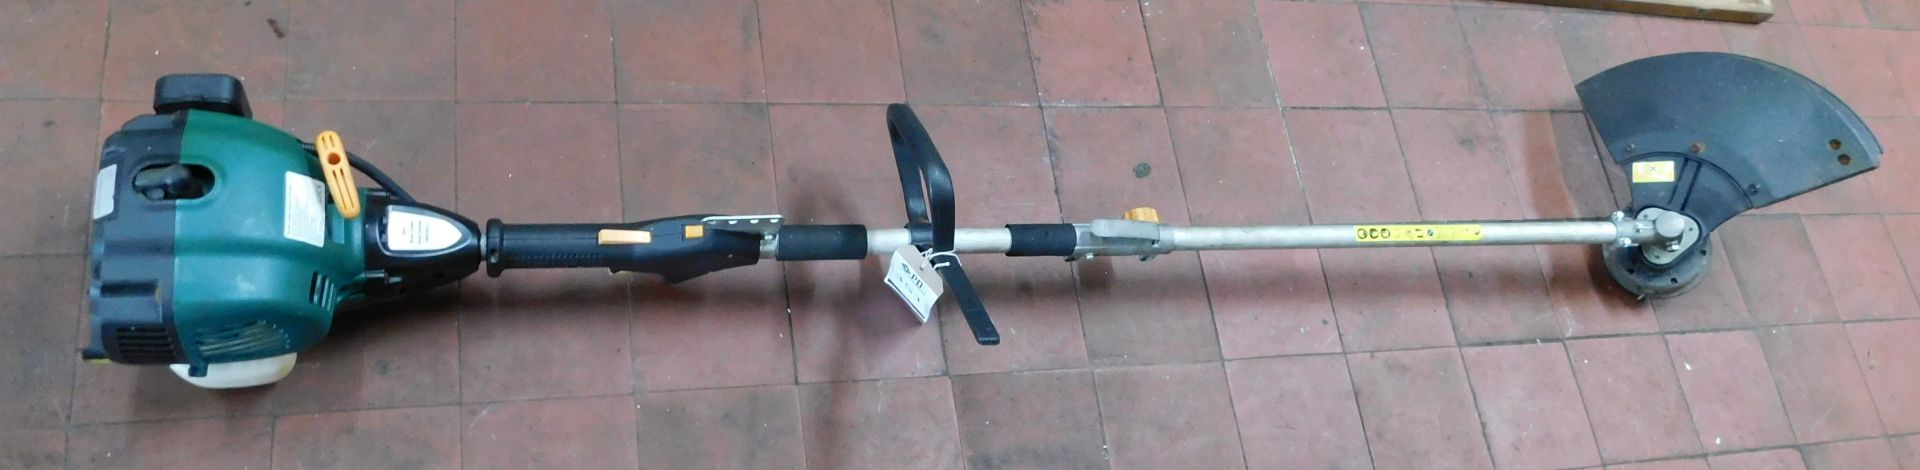 Unbadged Petrol Strimmer (for Spares/Repair) (Location: Bolton. Please Refer to General Notes)